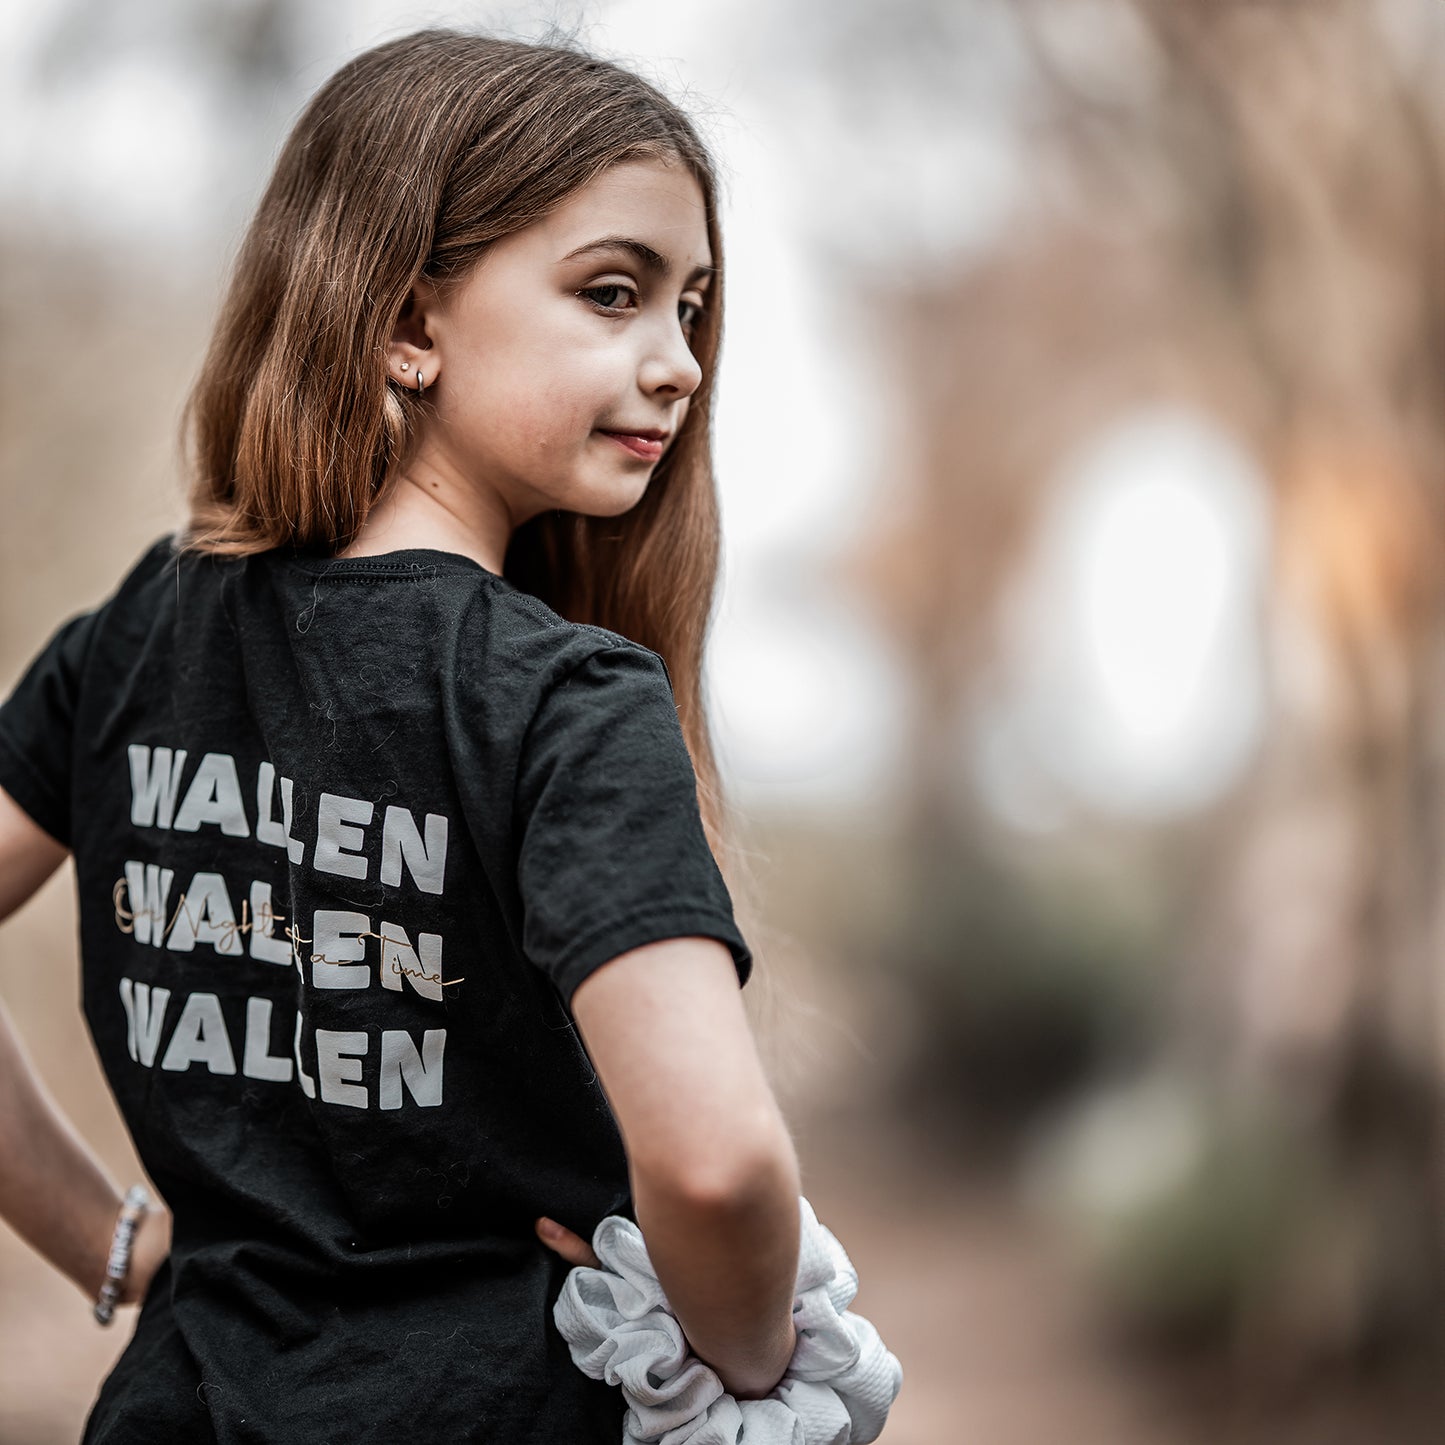 Retro Wallen Tee – Kids, Boys, Girls, Teens Country Western T-shirt for the Next Generation of Country Music Lovers